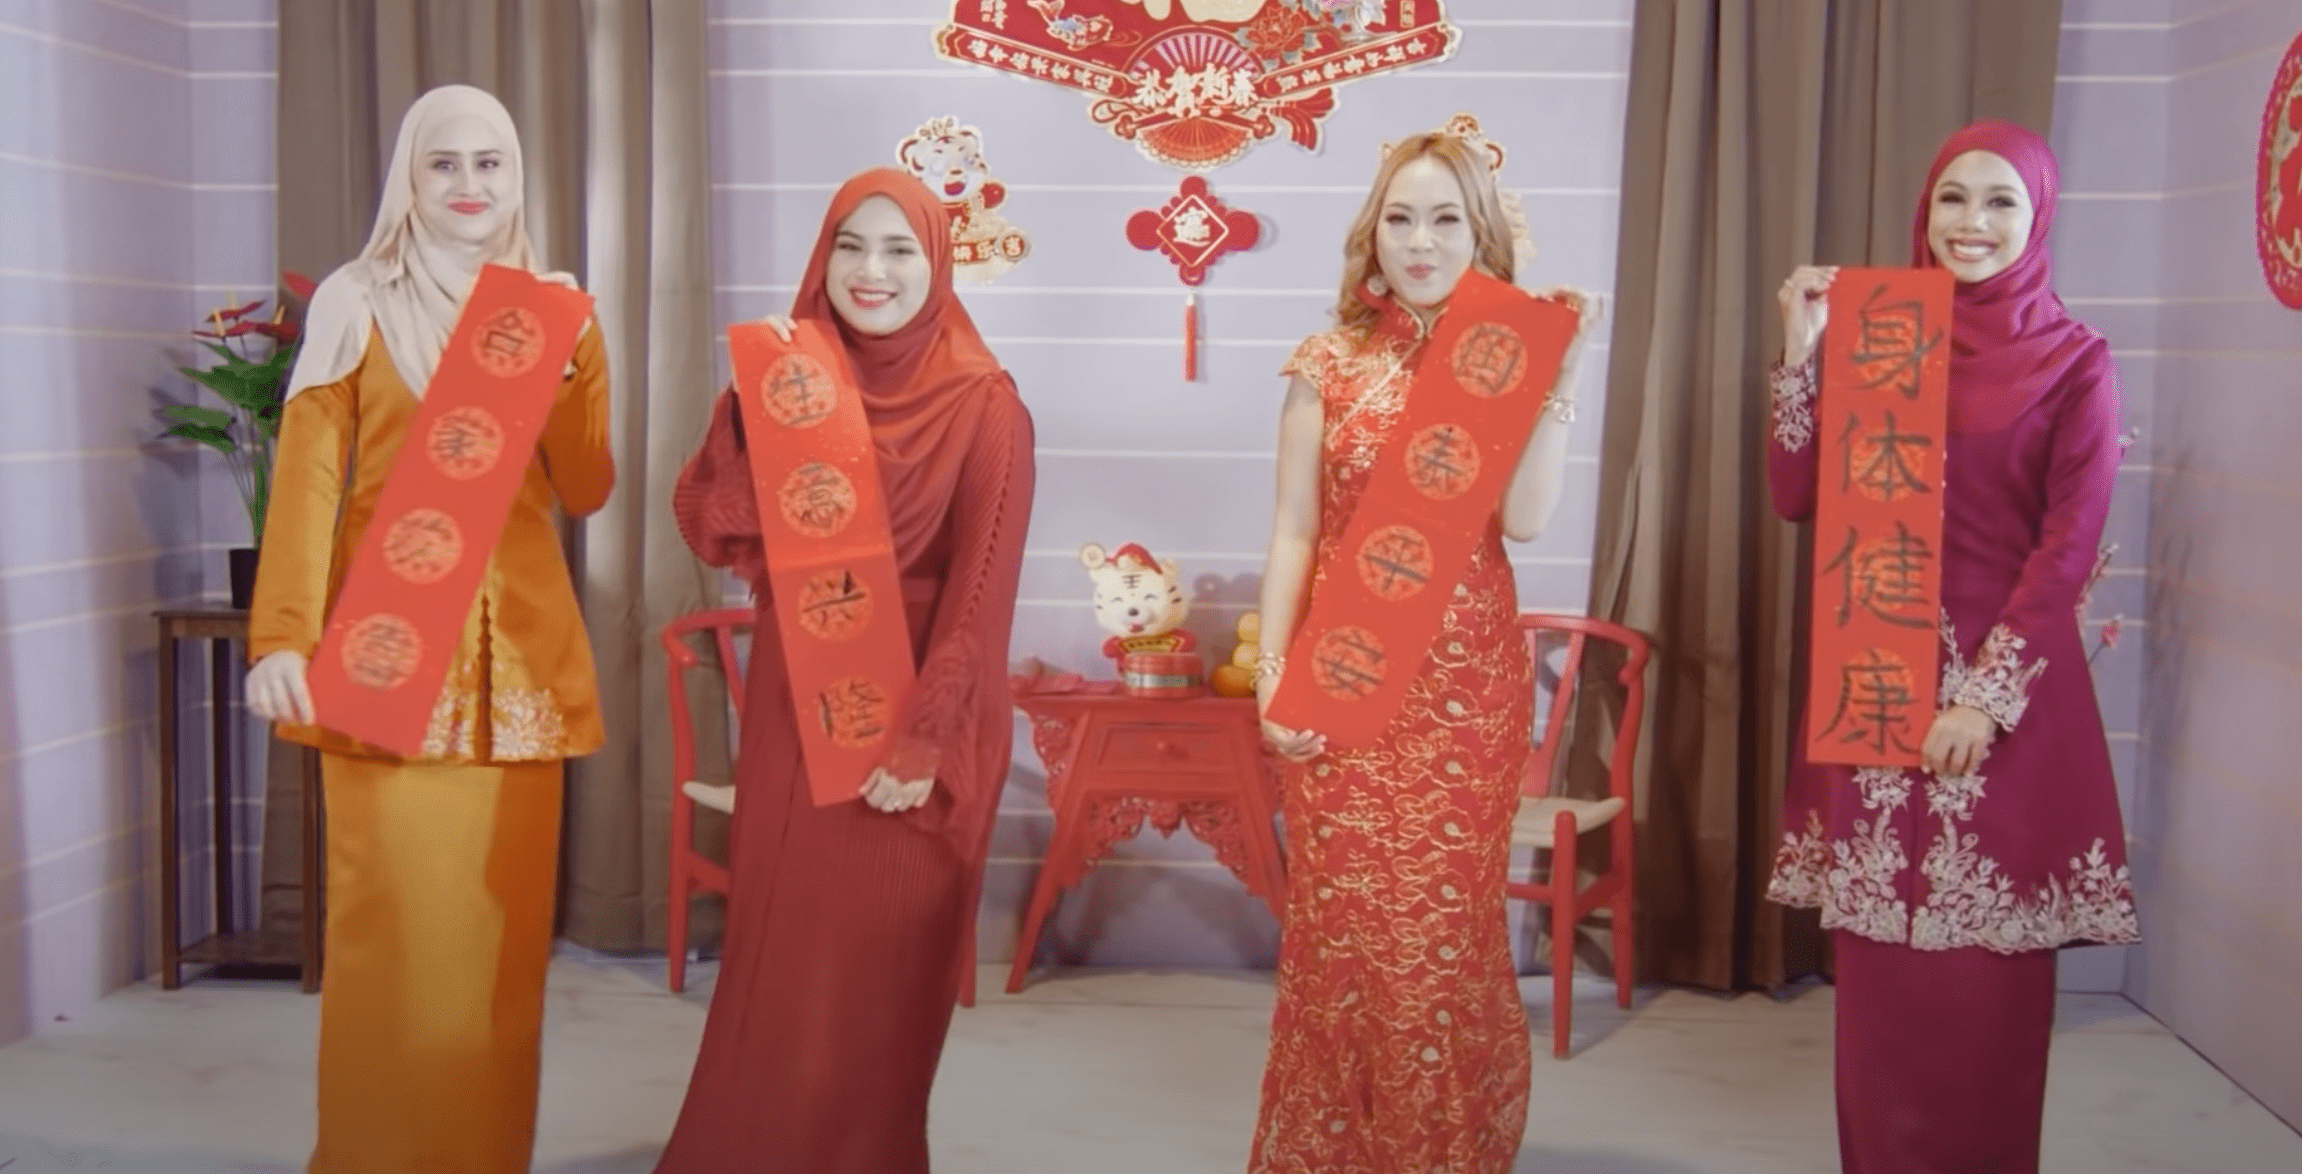 Malay cny-themed song 'dong dong qiang' praised for promoting multiculturalism | weirdkaya